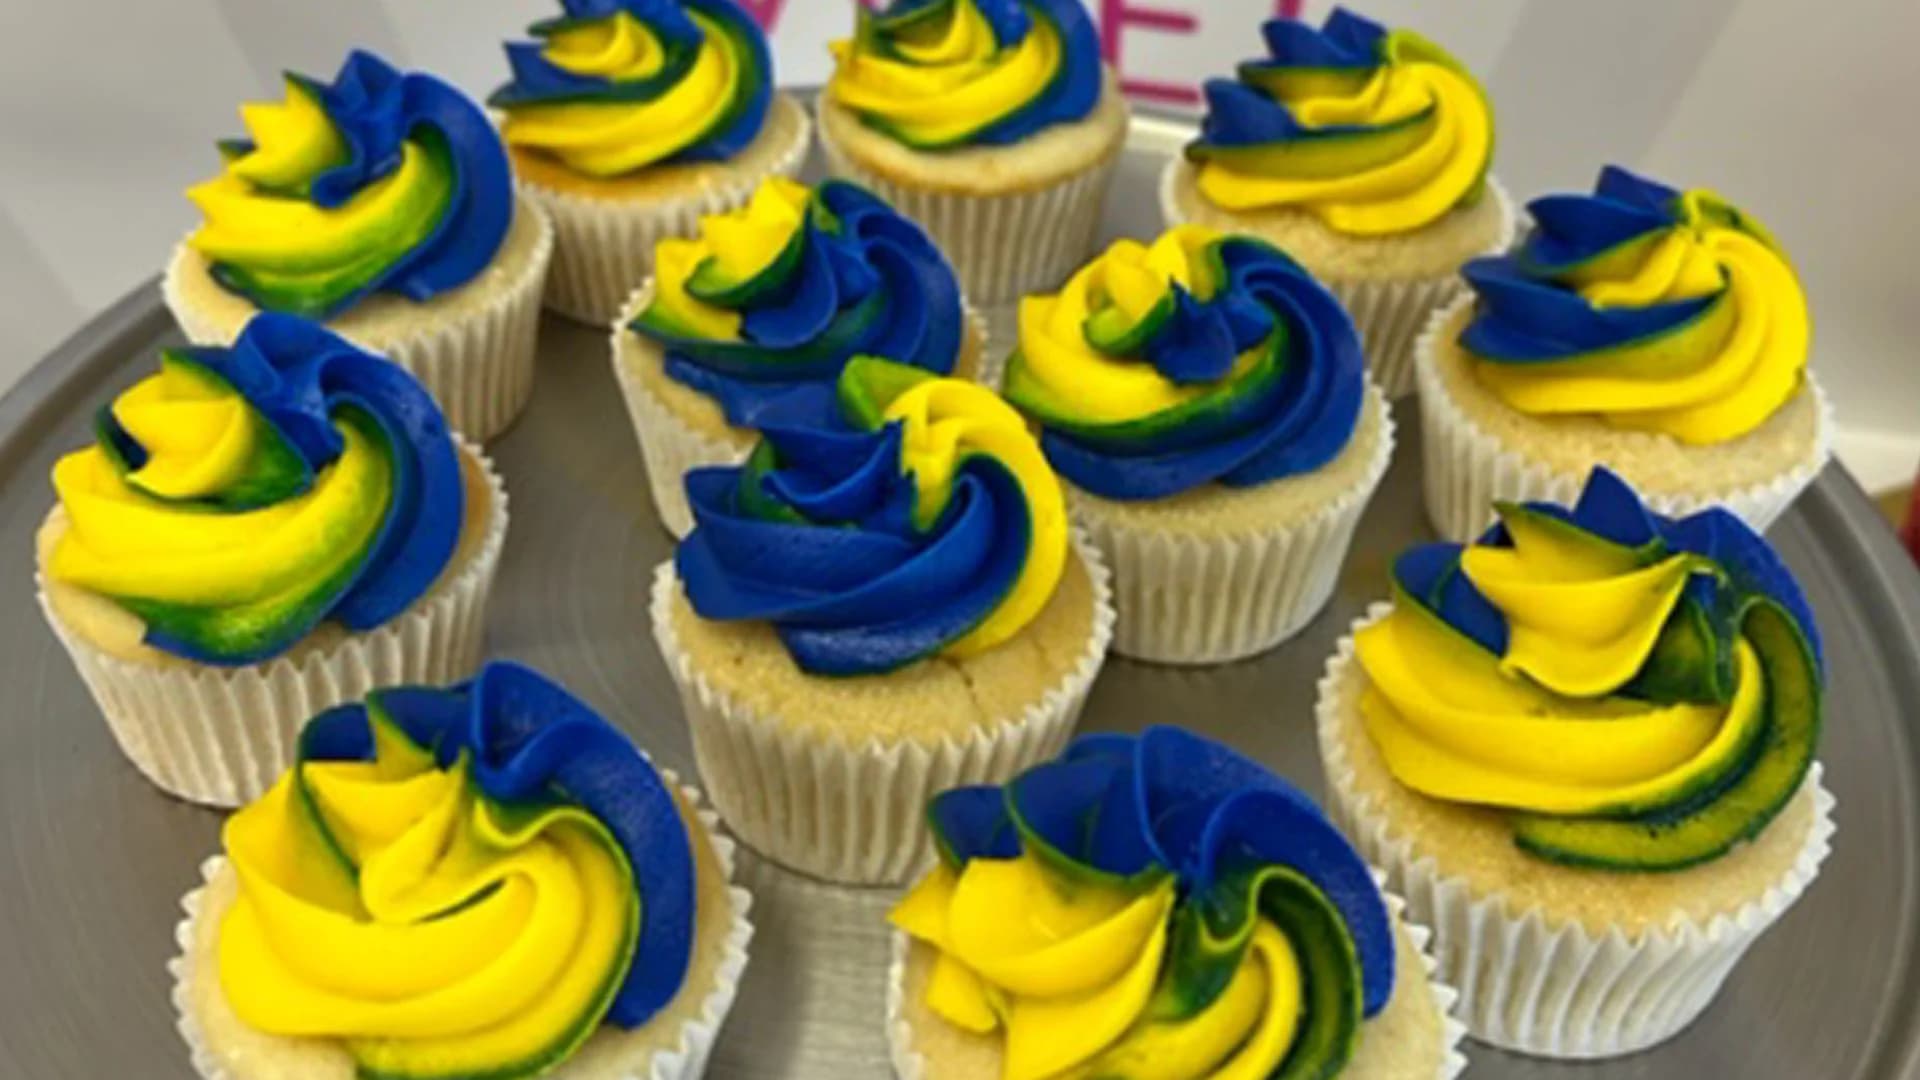 Norwalk bakery to donate 100% of proceeds from 'Ukrainian style' cupcakes to Save The Children